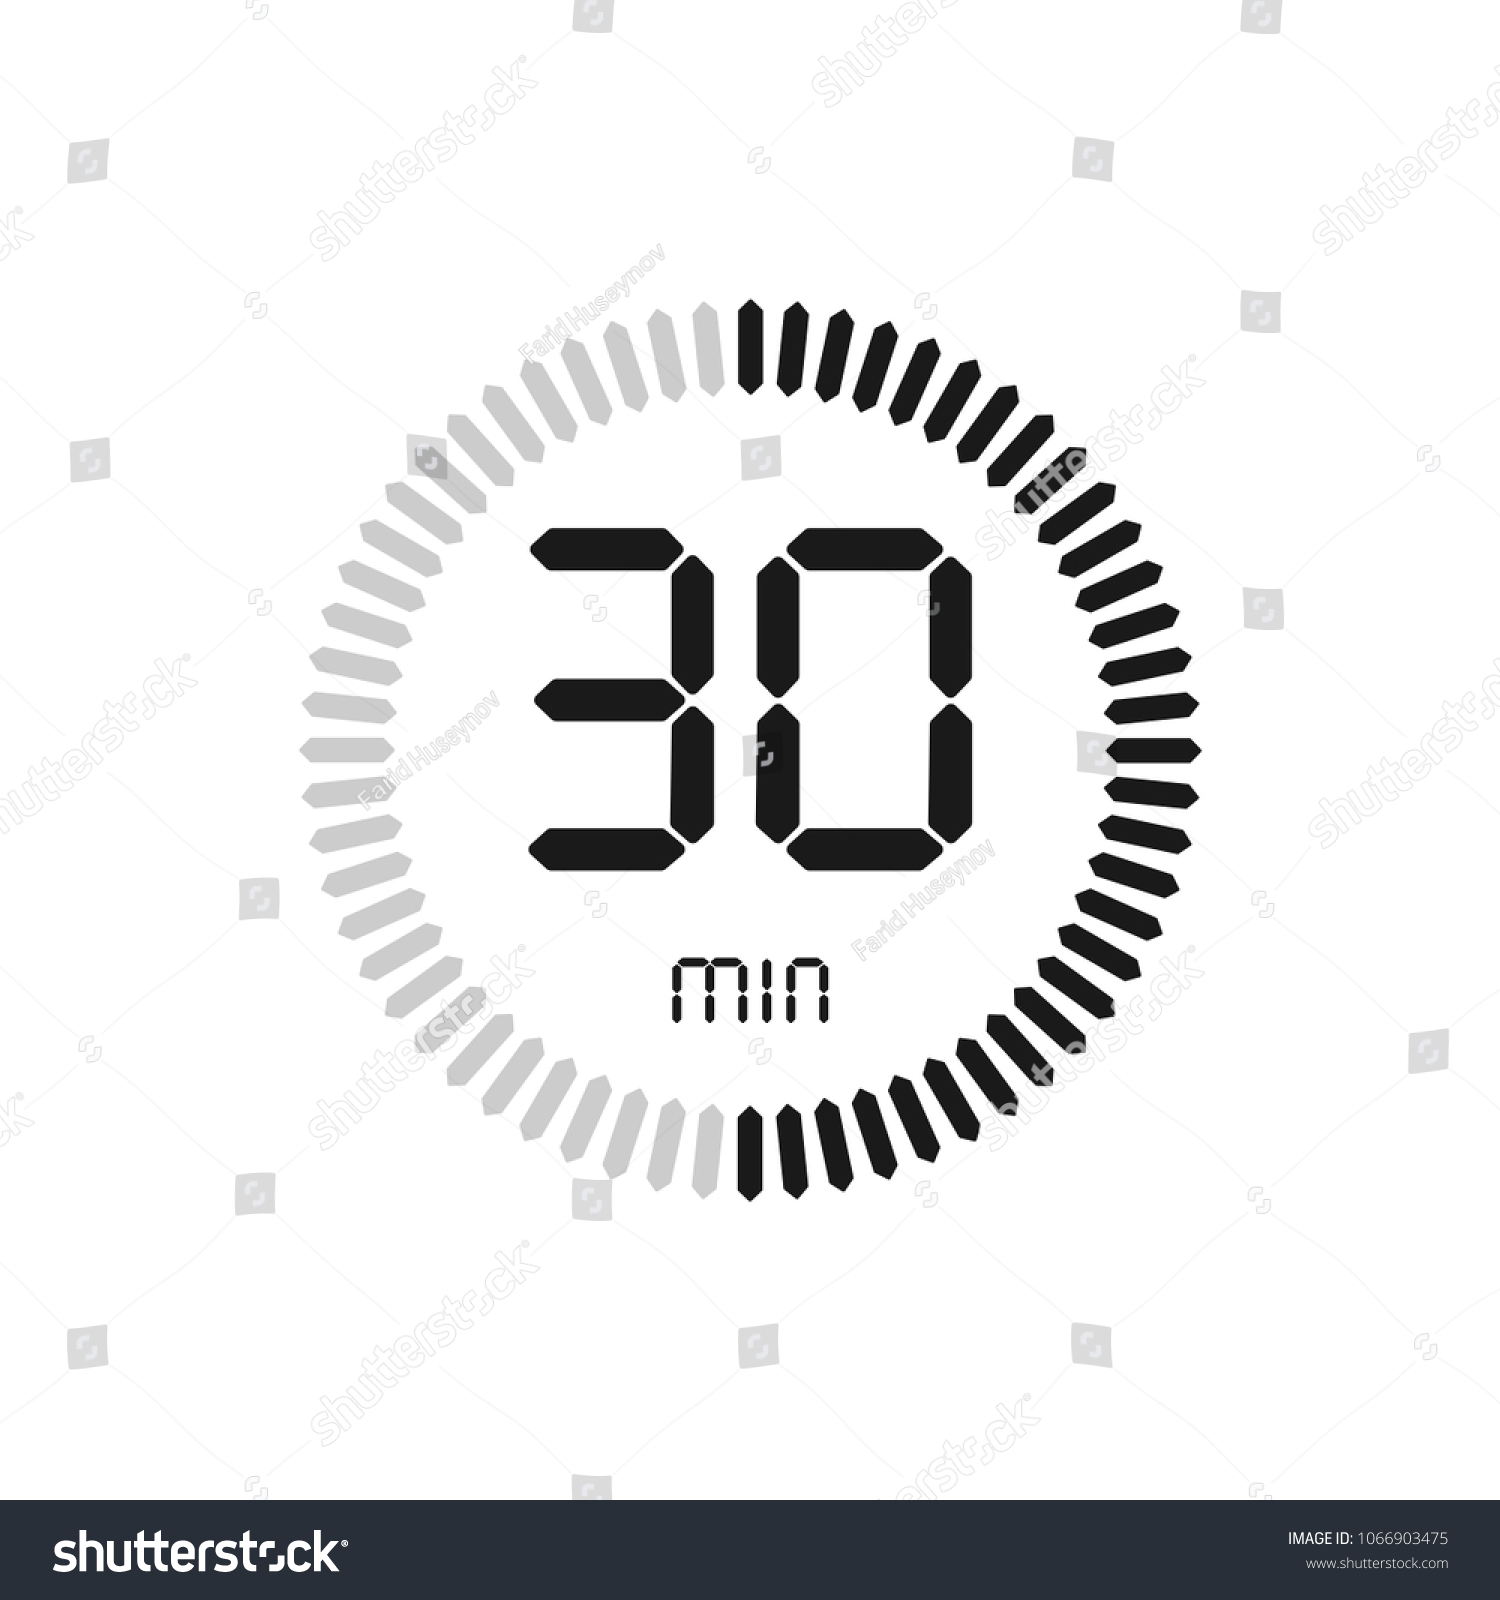 The 30 minutes, stopwatch vector icon, digital timer. clock and watch, timer, countdown symbol. #1066903475